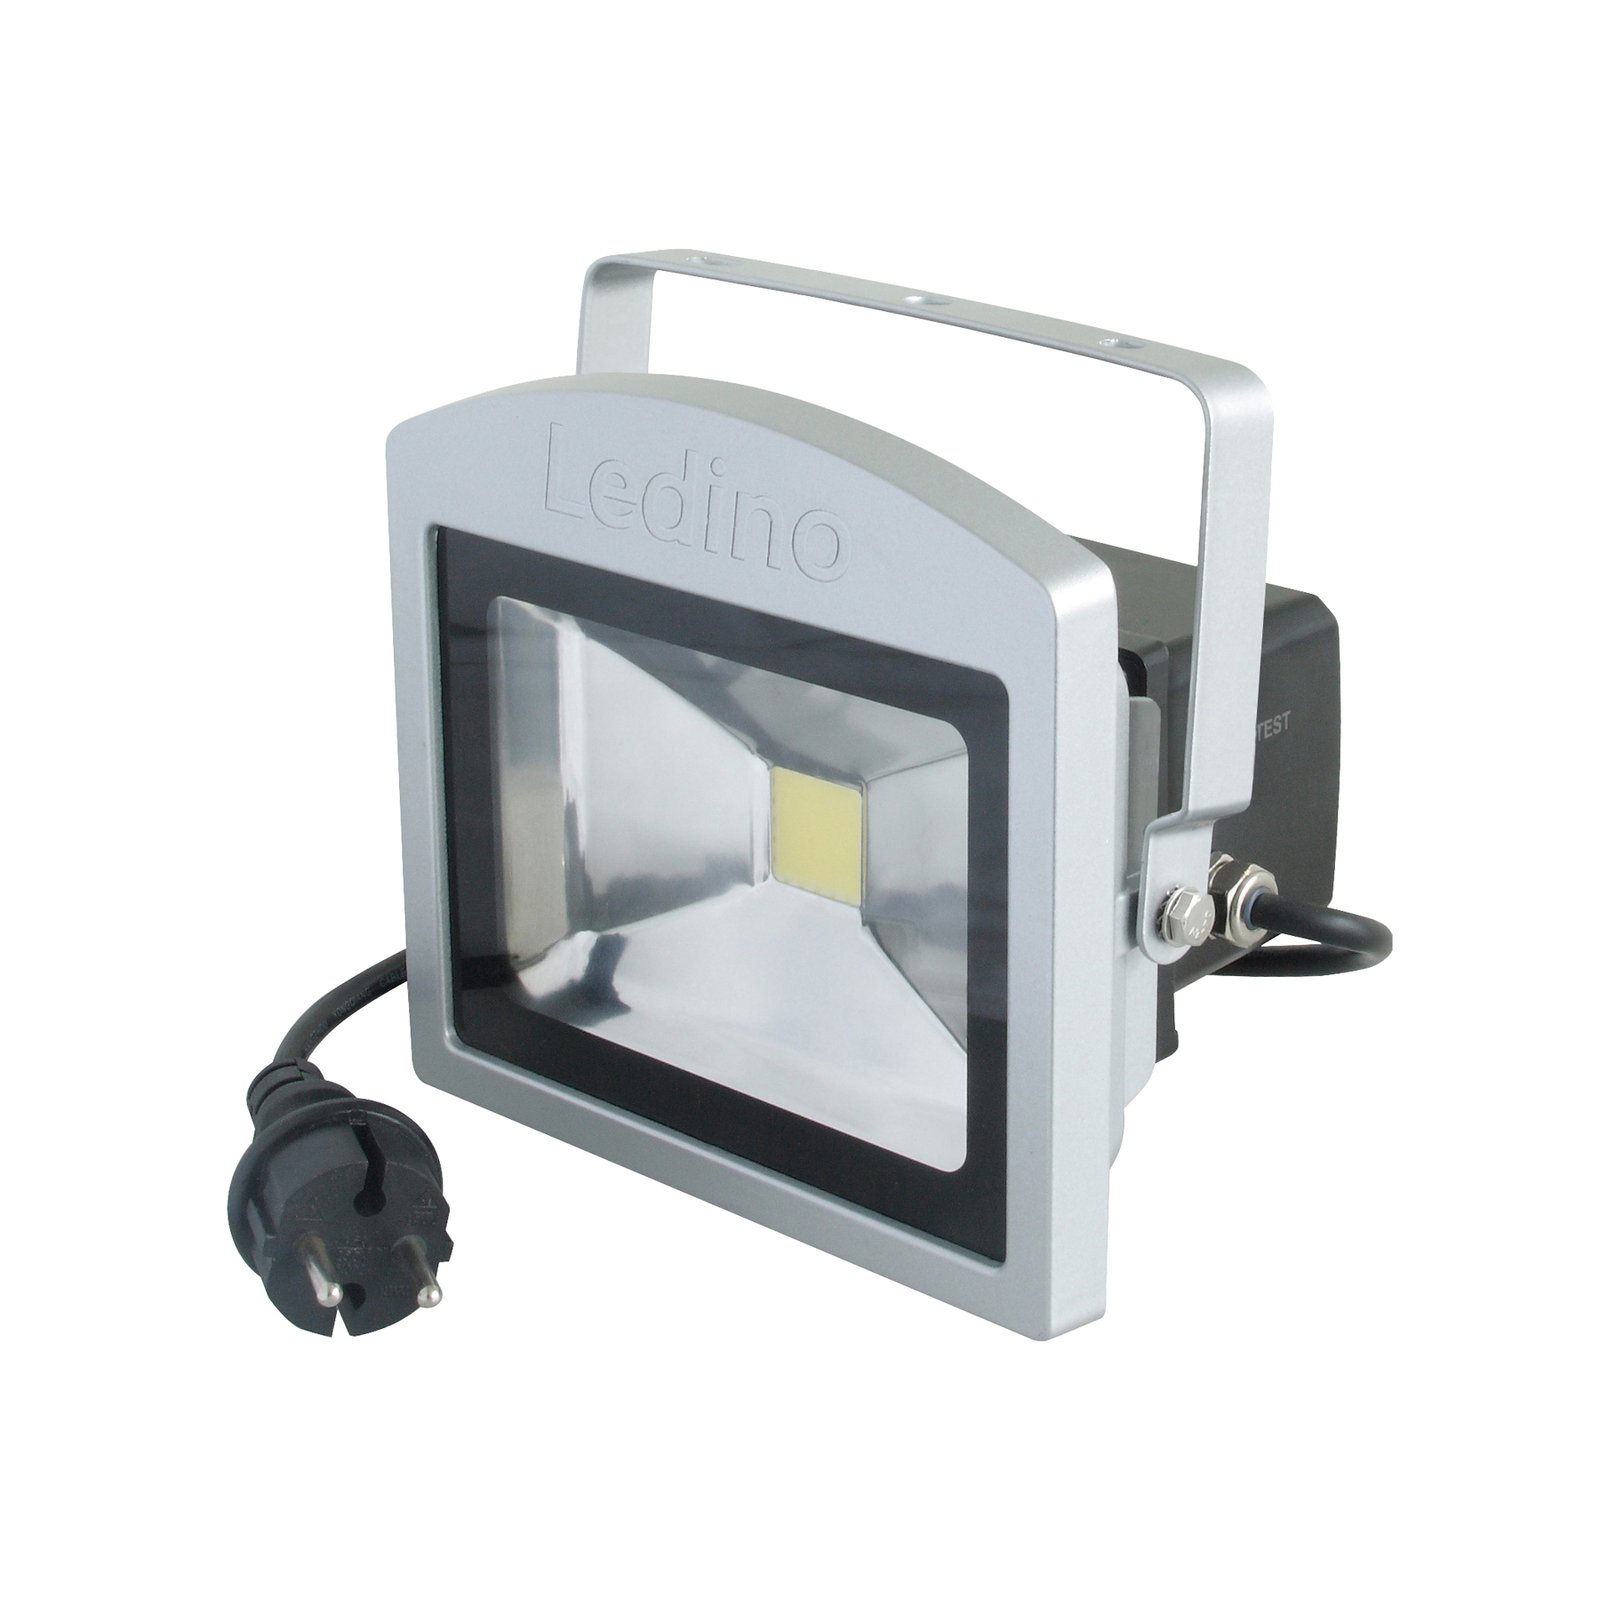 Benrath NB LED spotlight, emergency lighting with rechargeable battery